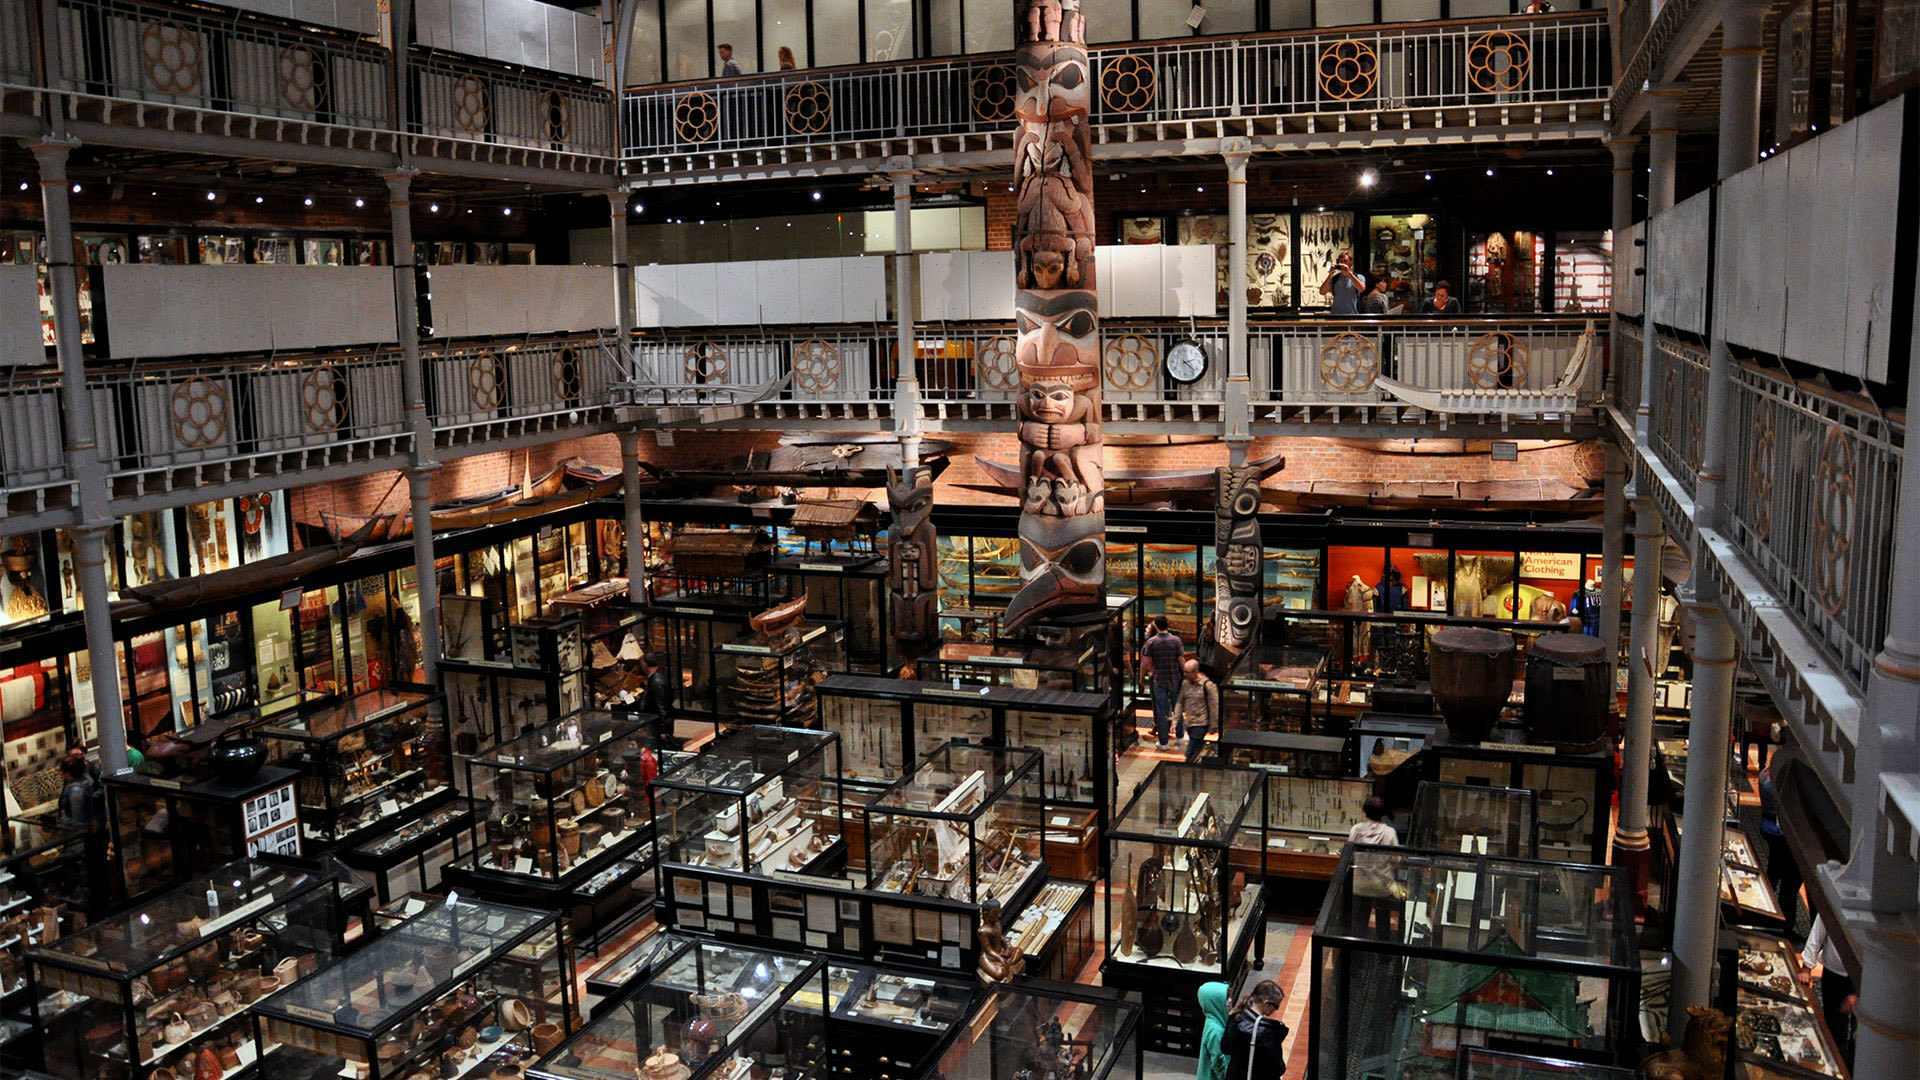 Pitt Rivers Museum in Oxford